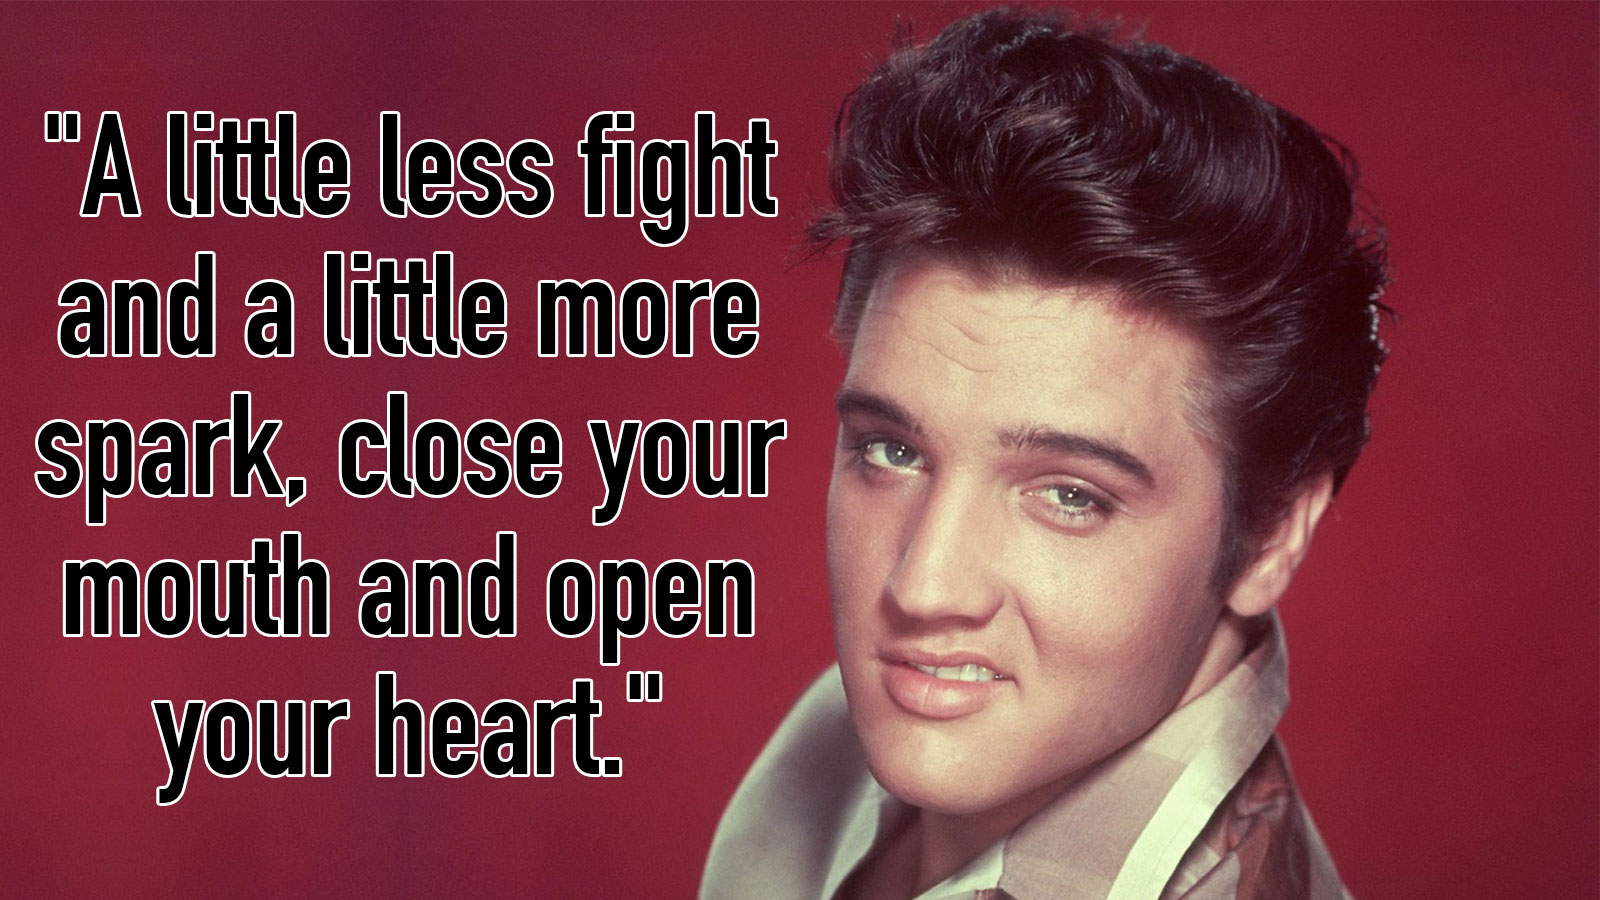 Can You Guess the Elvis Presley Song This Lyric Is From? Quiz 31